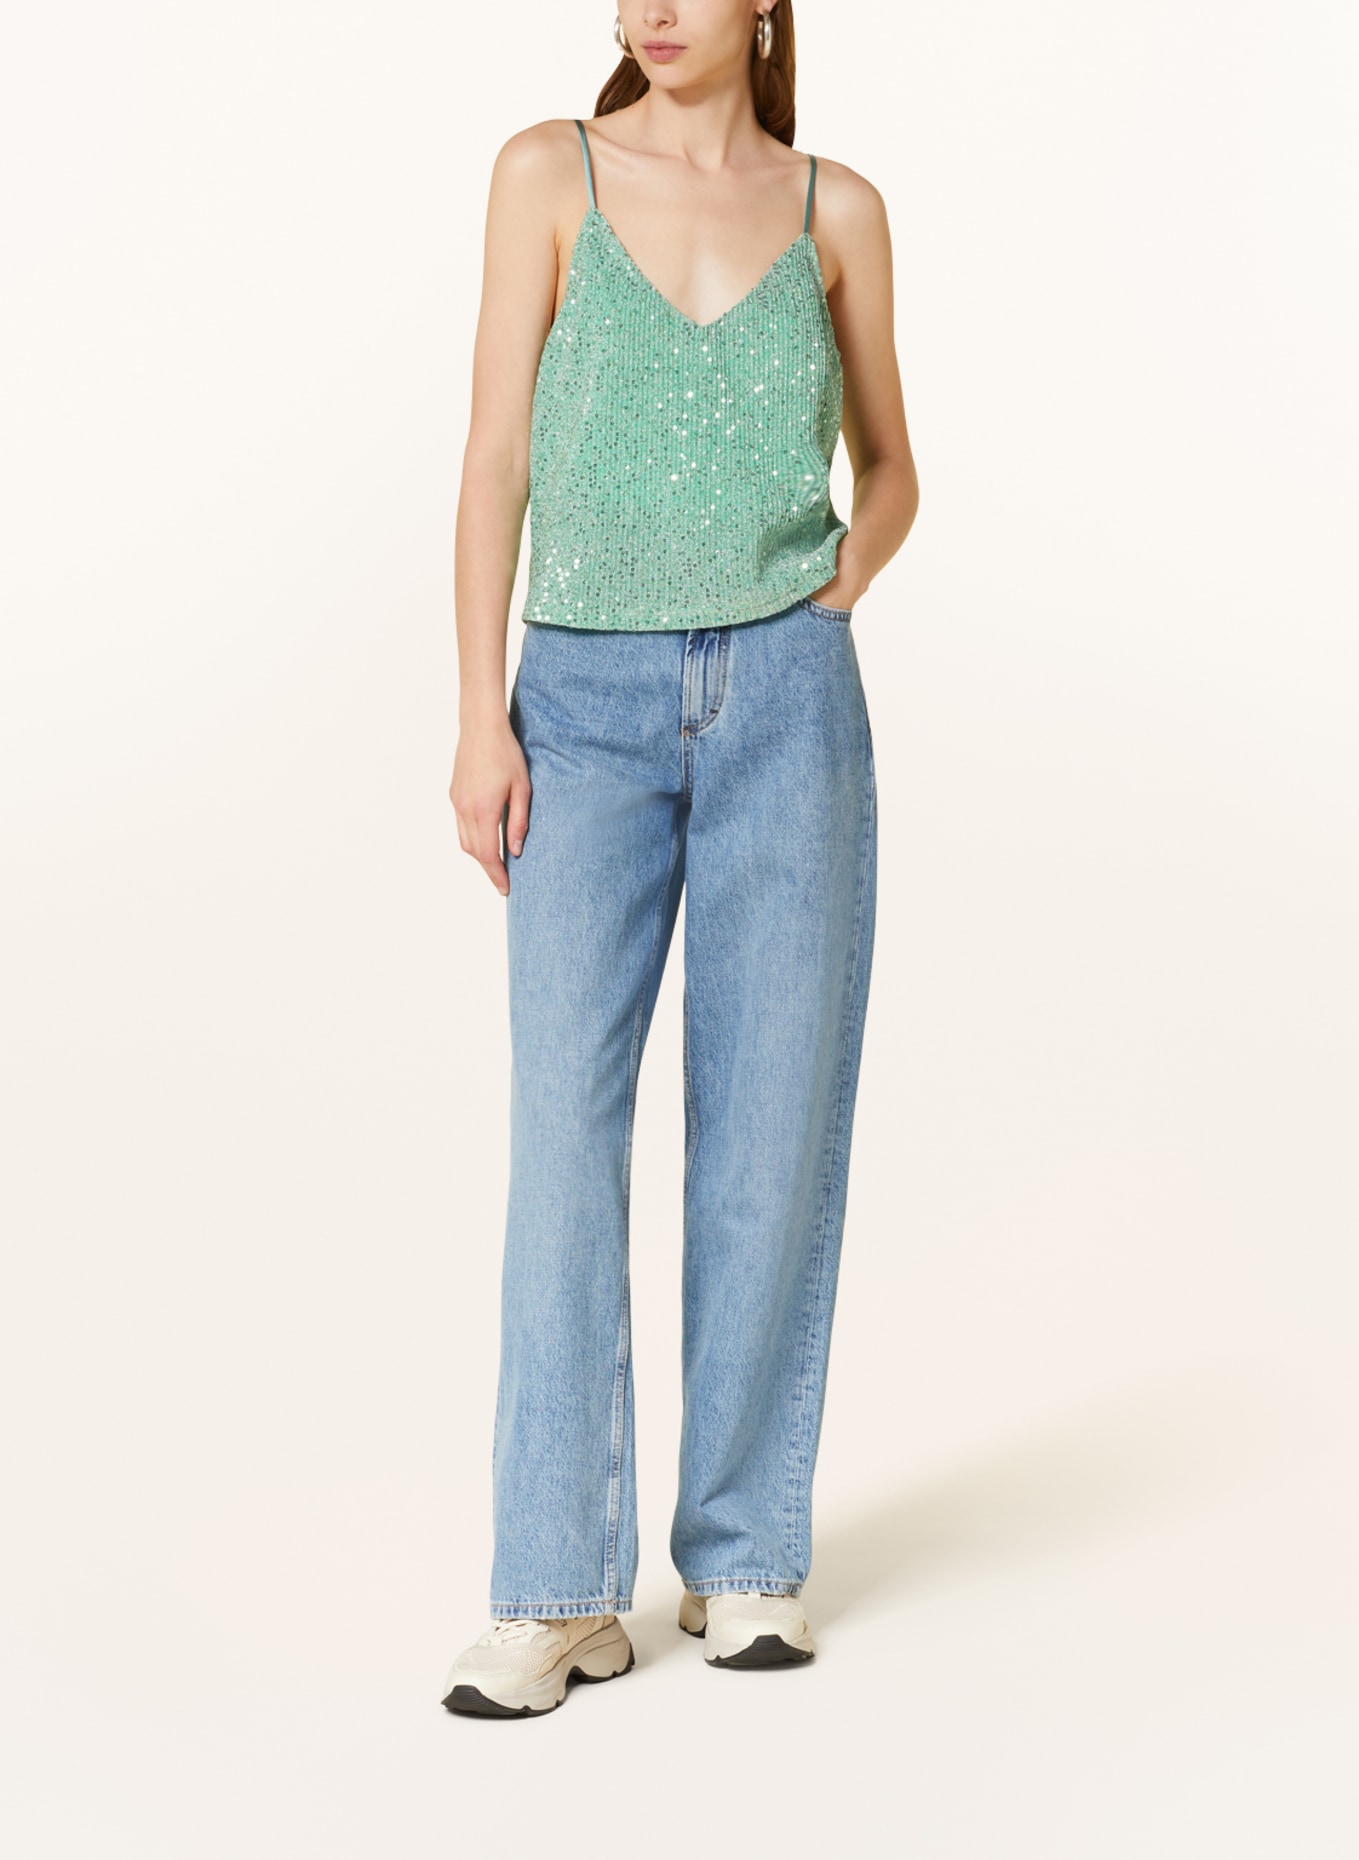 NEO NOIR Cropped top ELINAS with sequins, Color: MINT (Image 2)